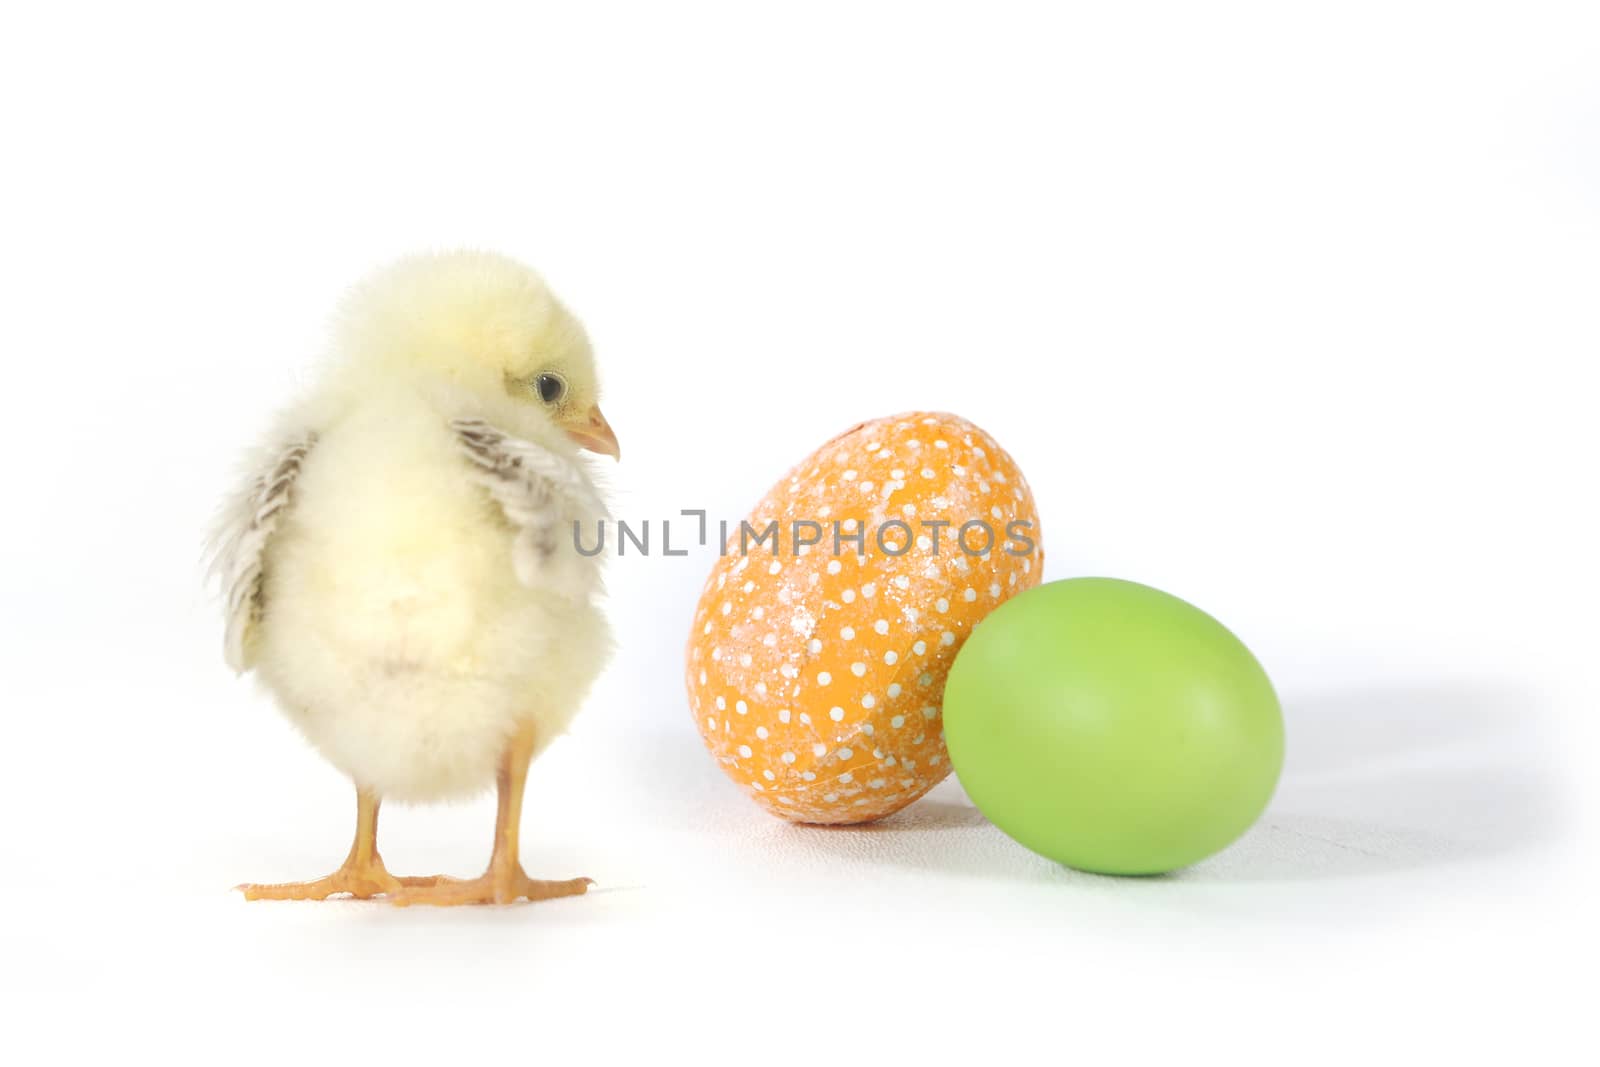 Holiday Themed Image With Baby Chicks and Eggs by tobkatrina